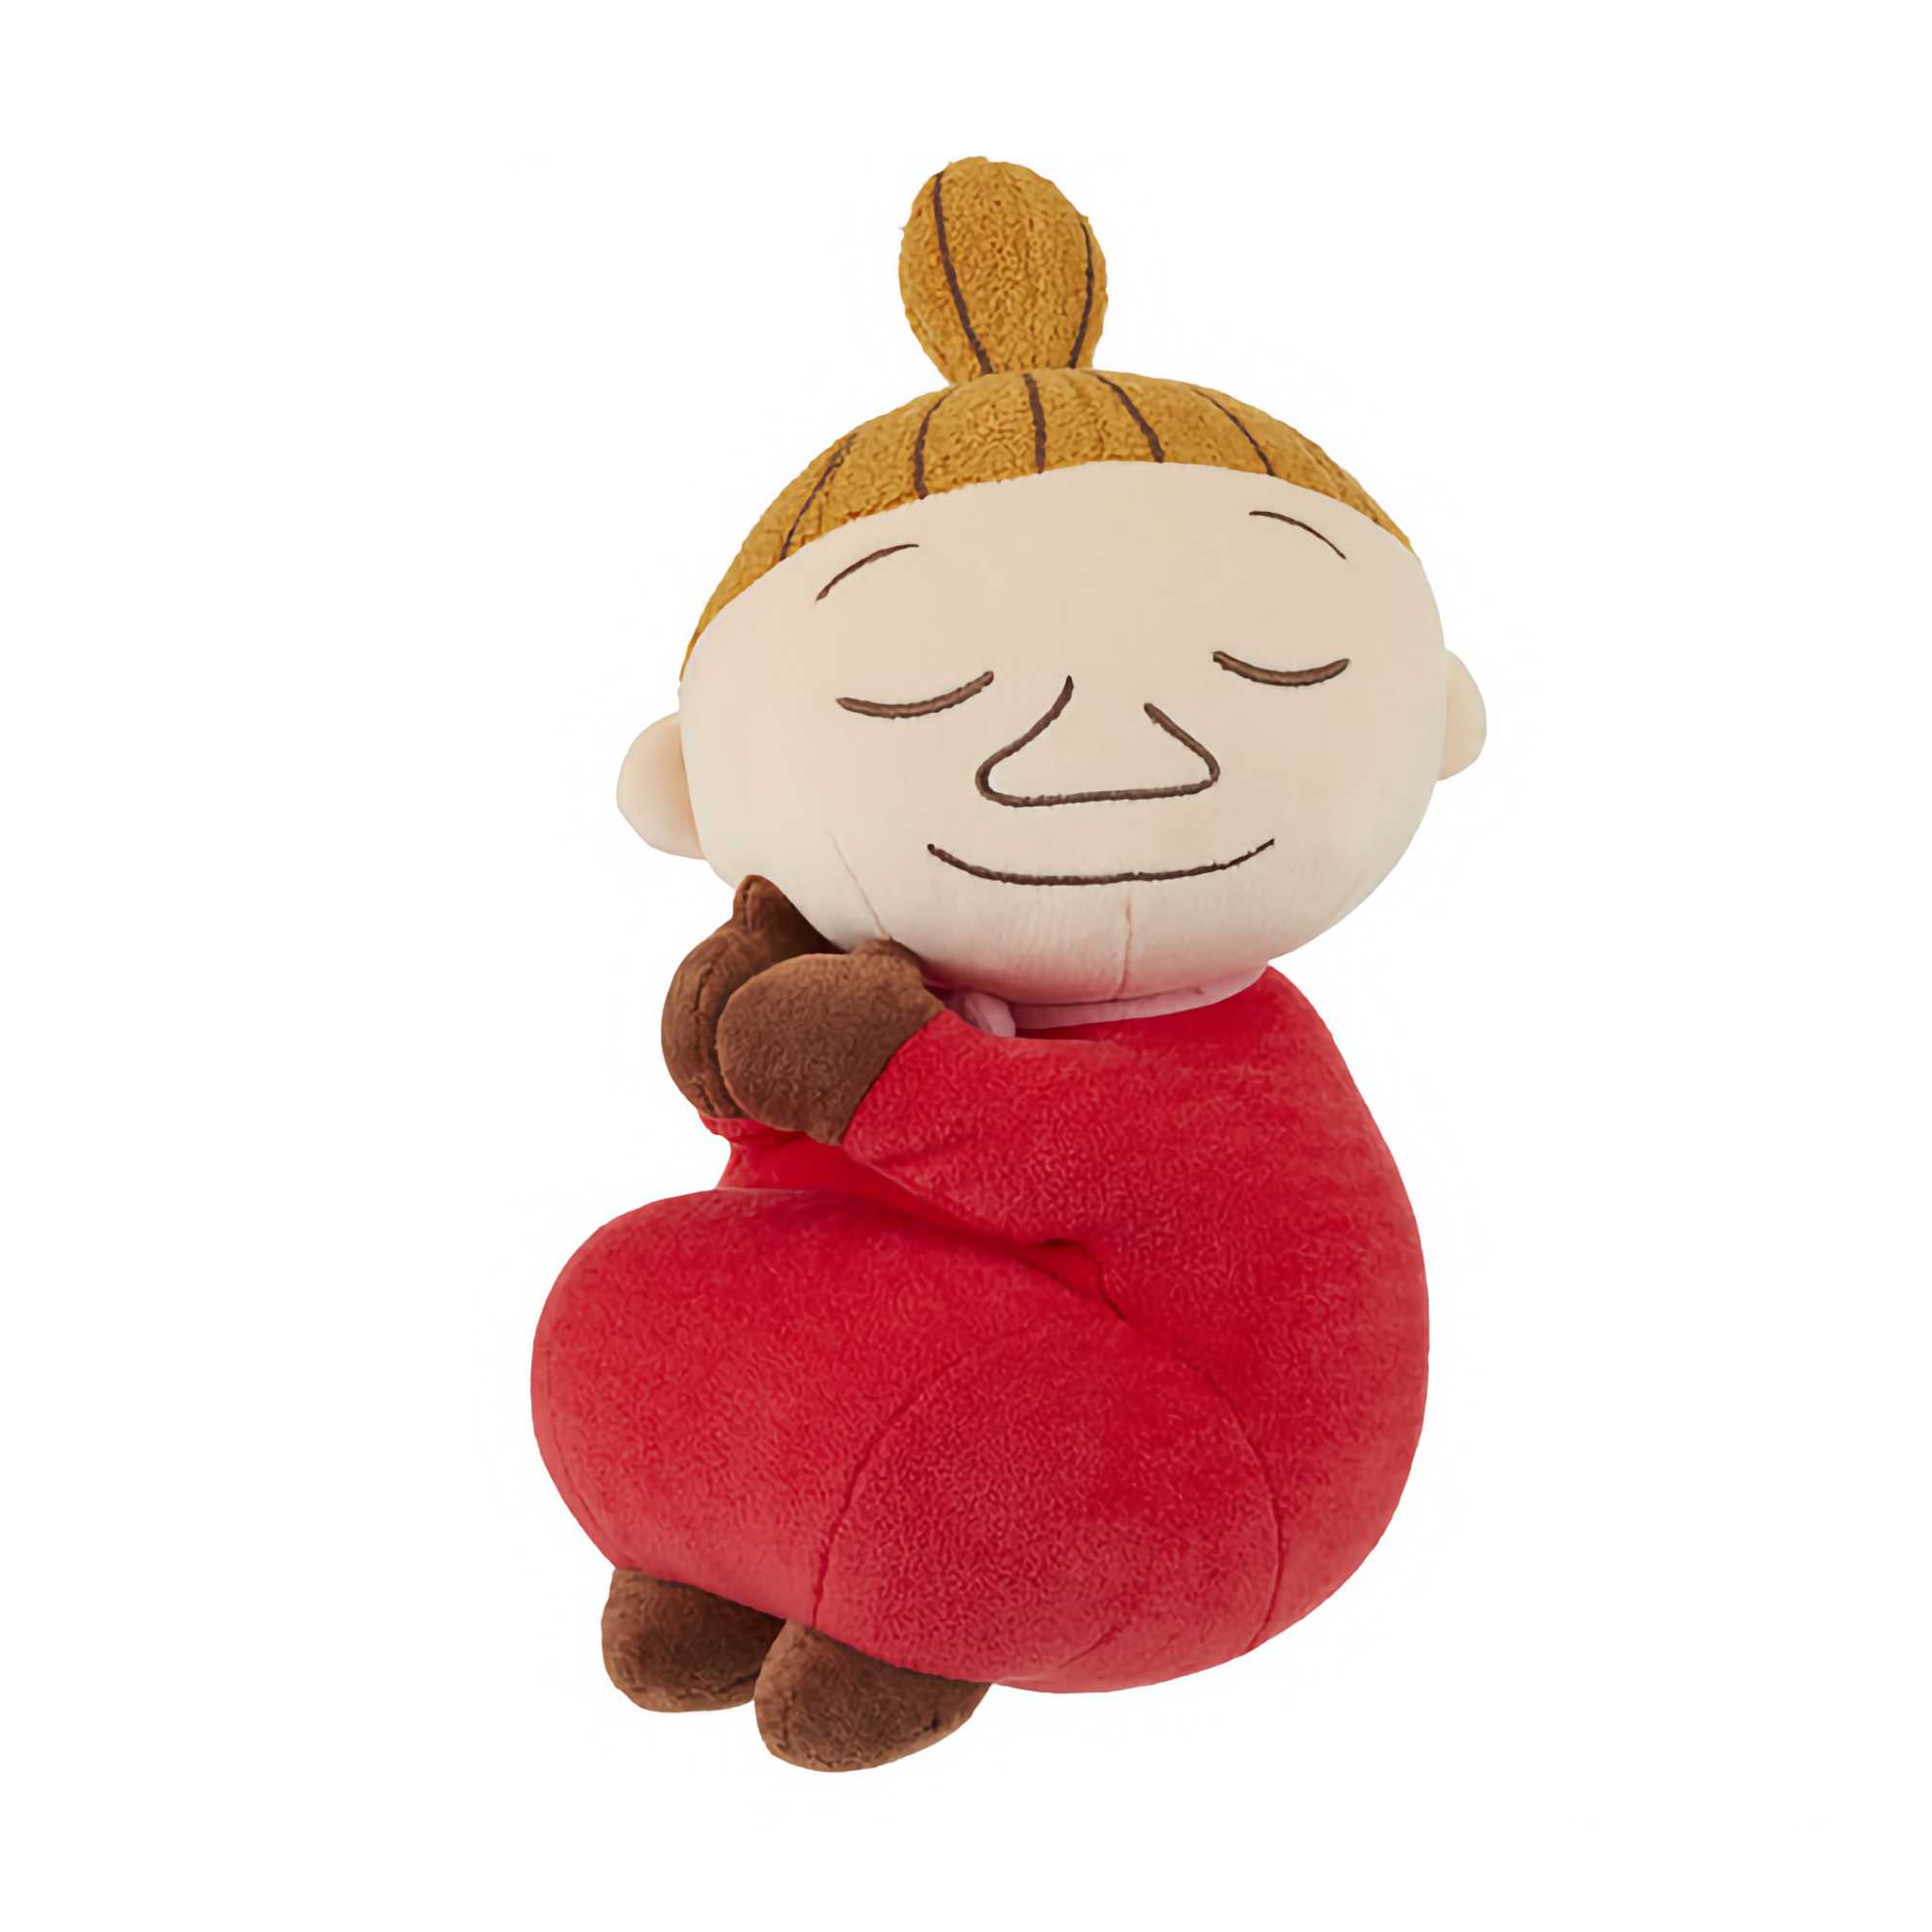 Moomin Valley Tove Jansson Doll, Little My